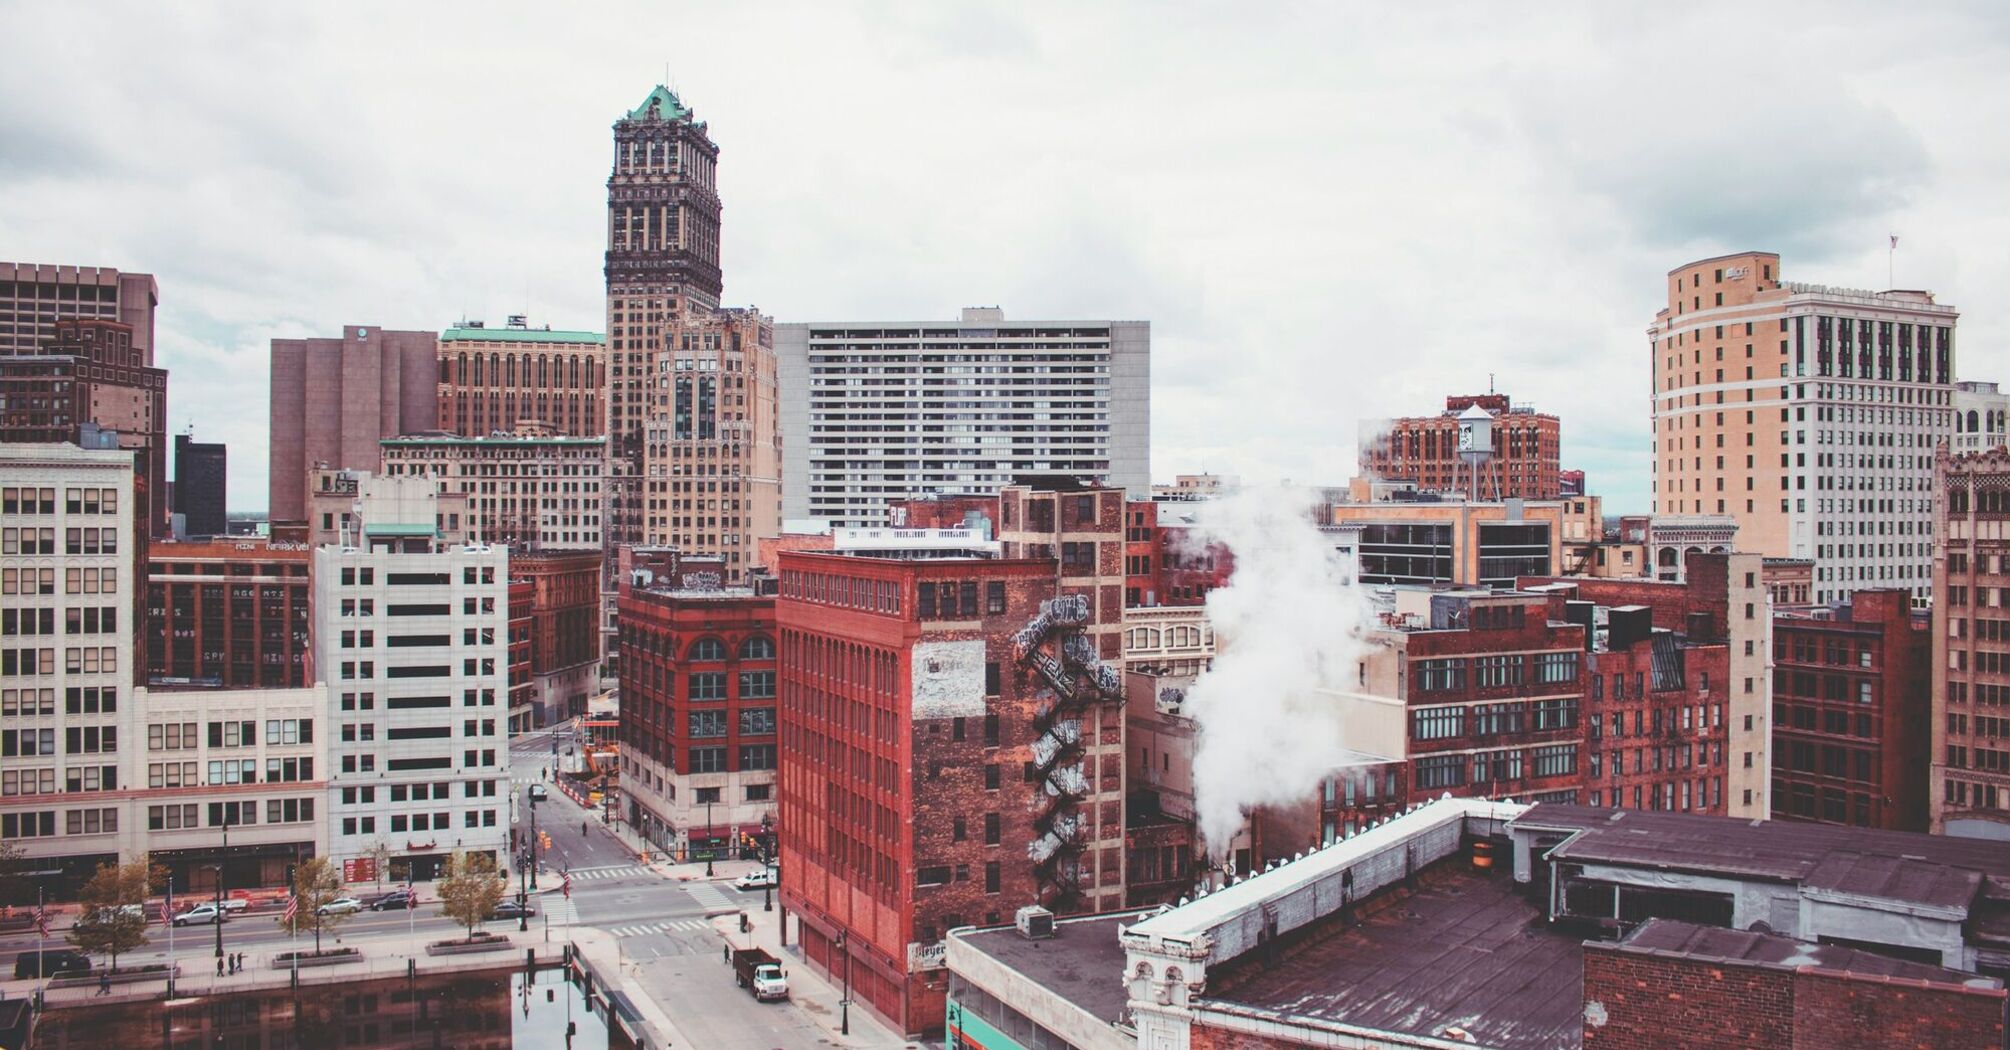 A view of Detroit's downtown with historic and modern buildings, some showing signs of wear, under a cloudy sky